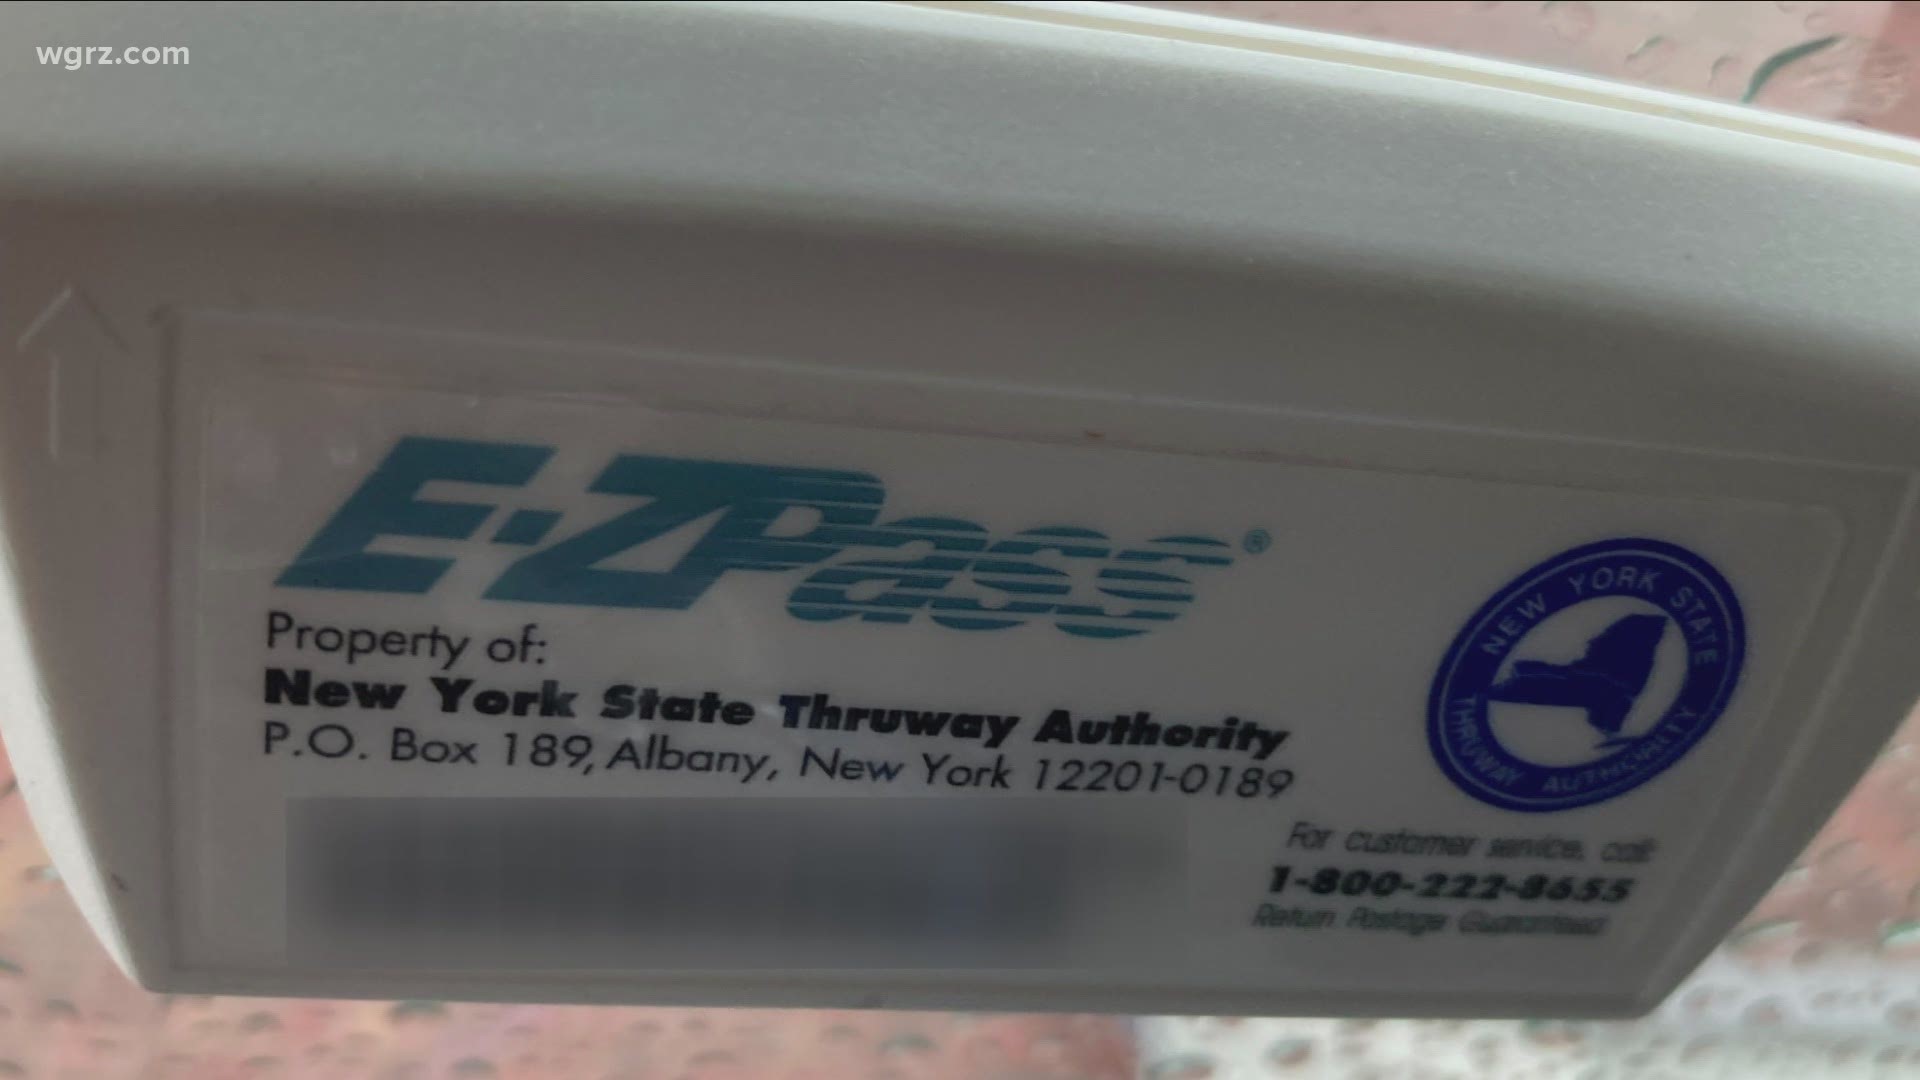 Returning an EZPass (toll tag) "Return Postage Guaranteed or FCM